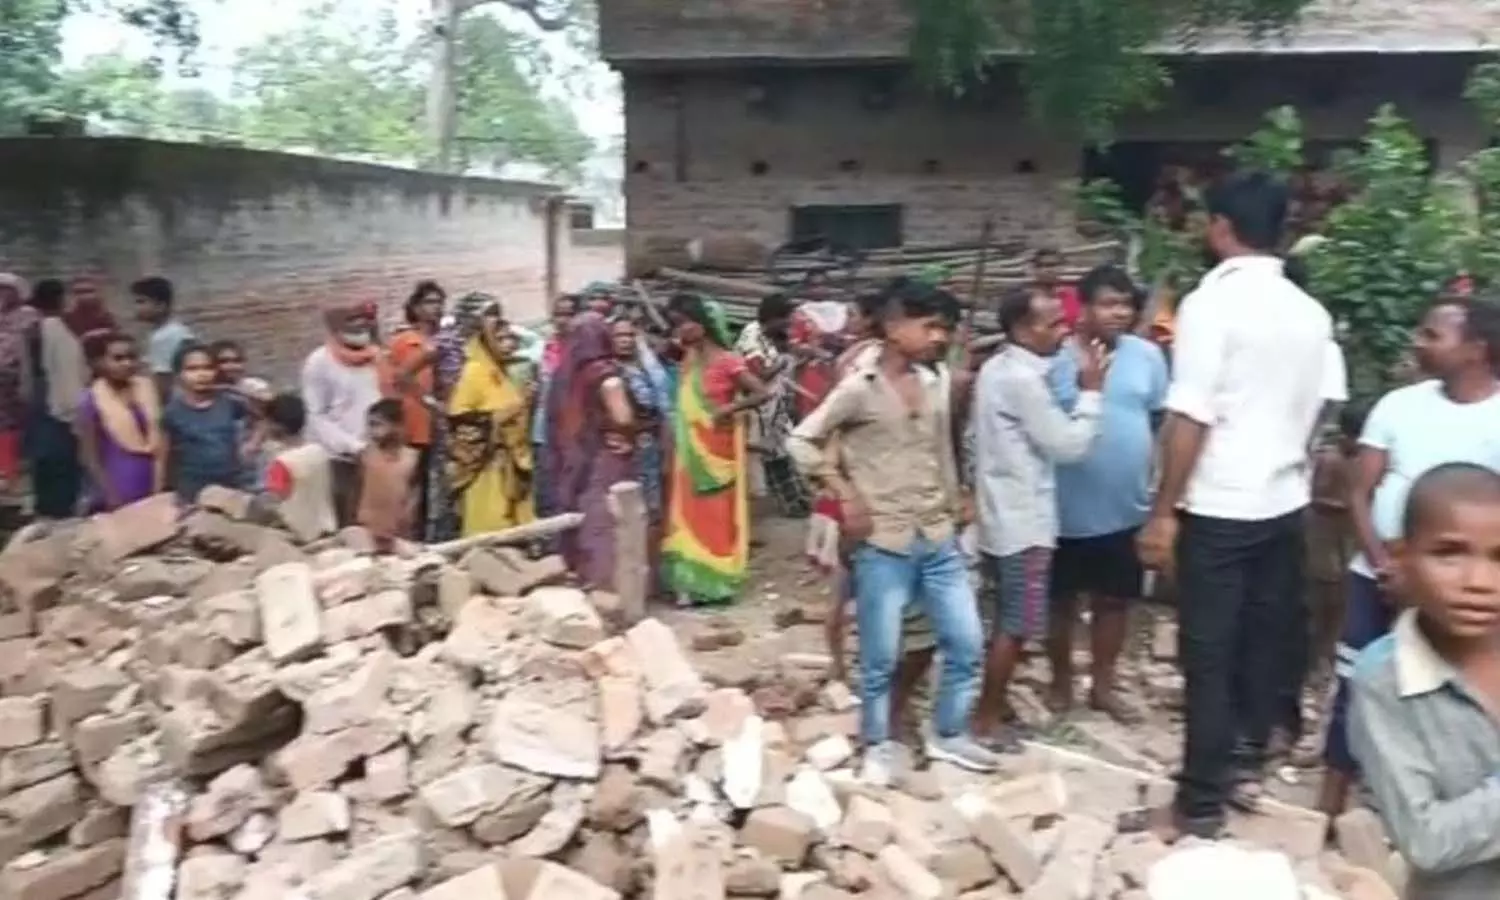 A two-storey house collapsed in Amethi sudden explosion, a youth scorched